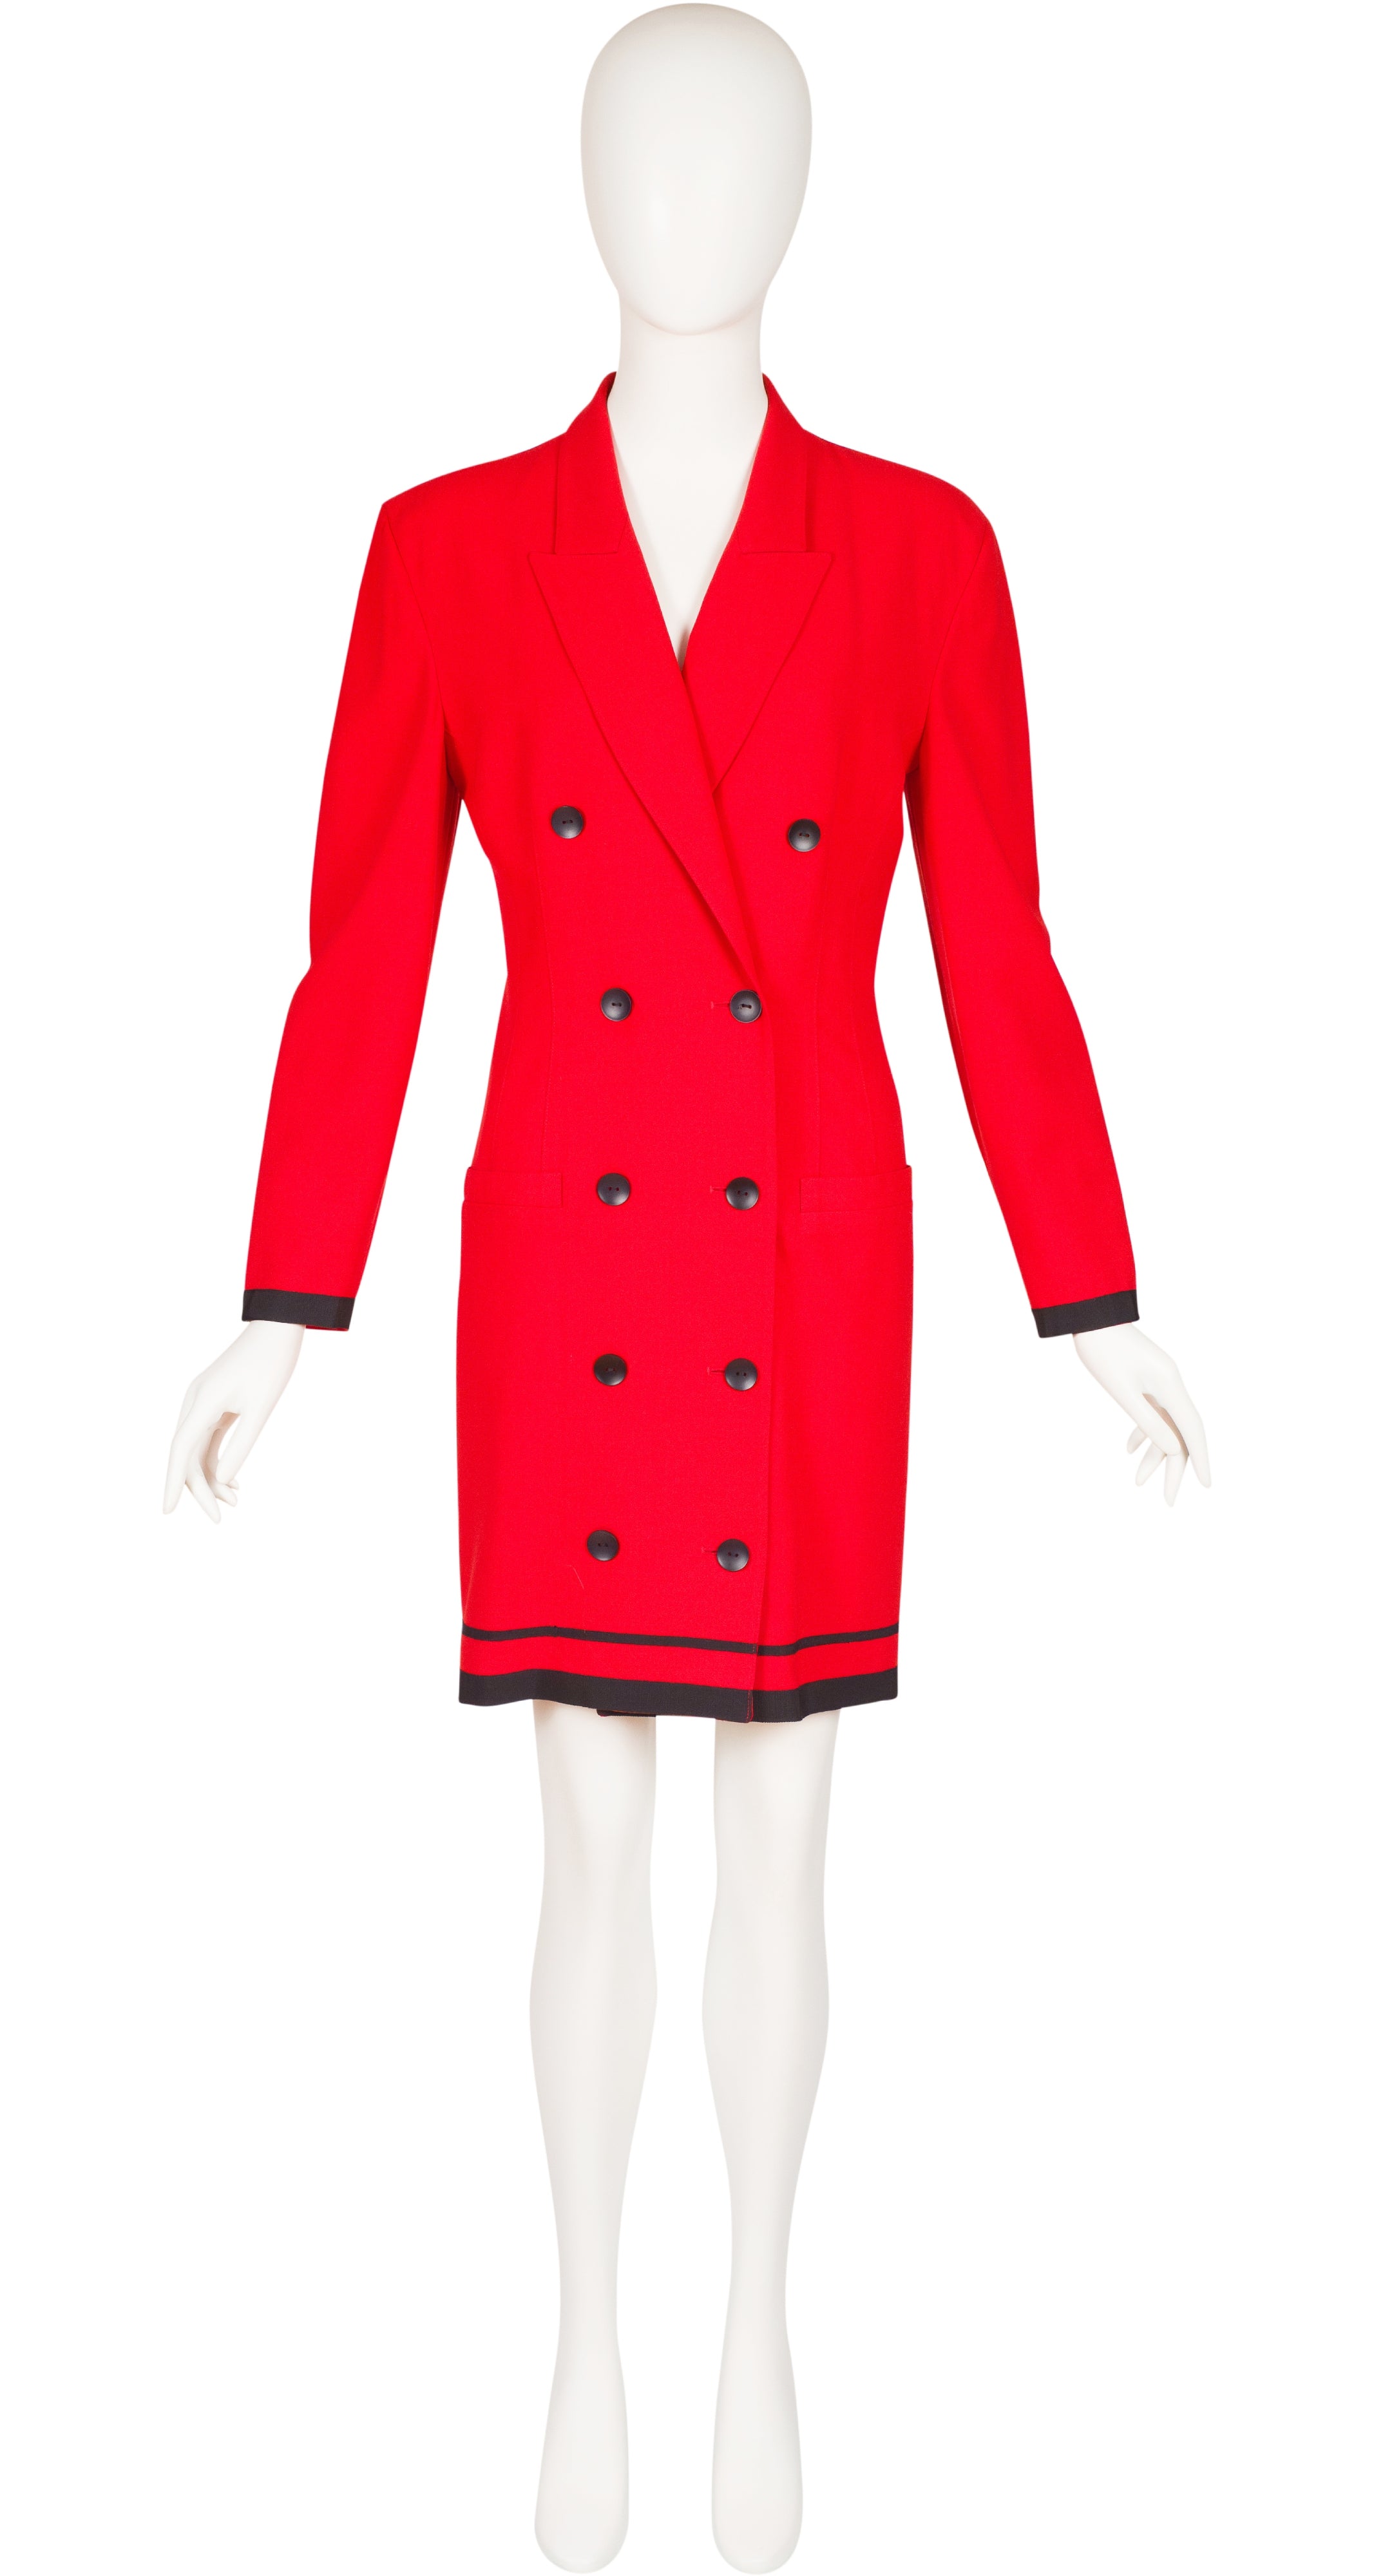 Louis Féraud 1990s Red Wool Crepe Double-Breasted Coat Dress